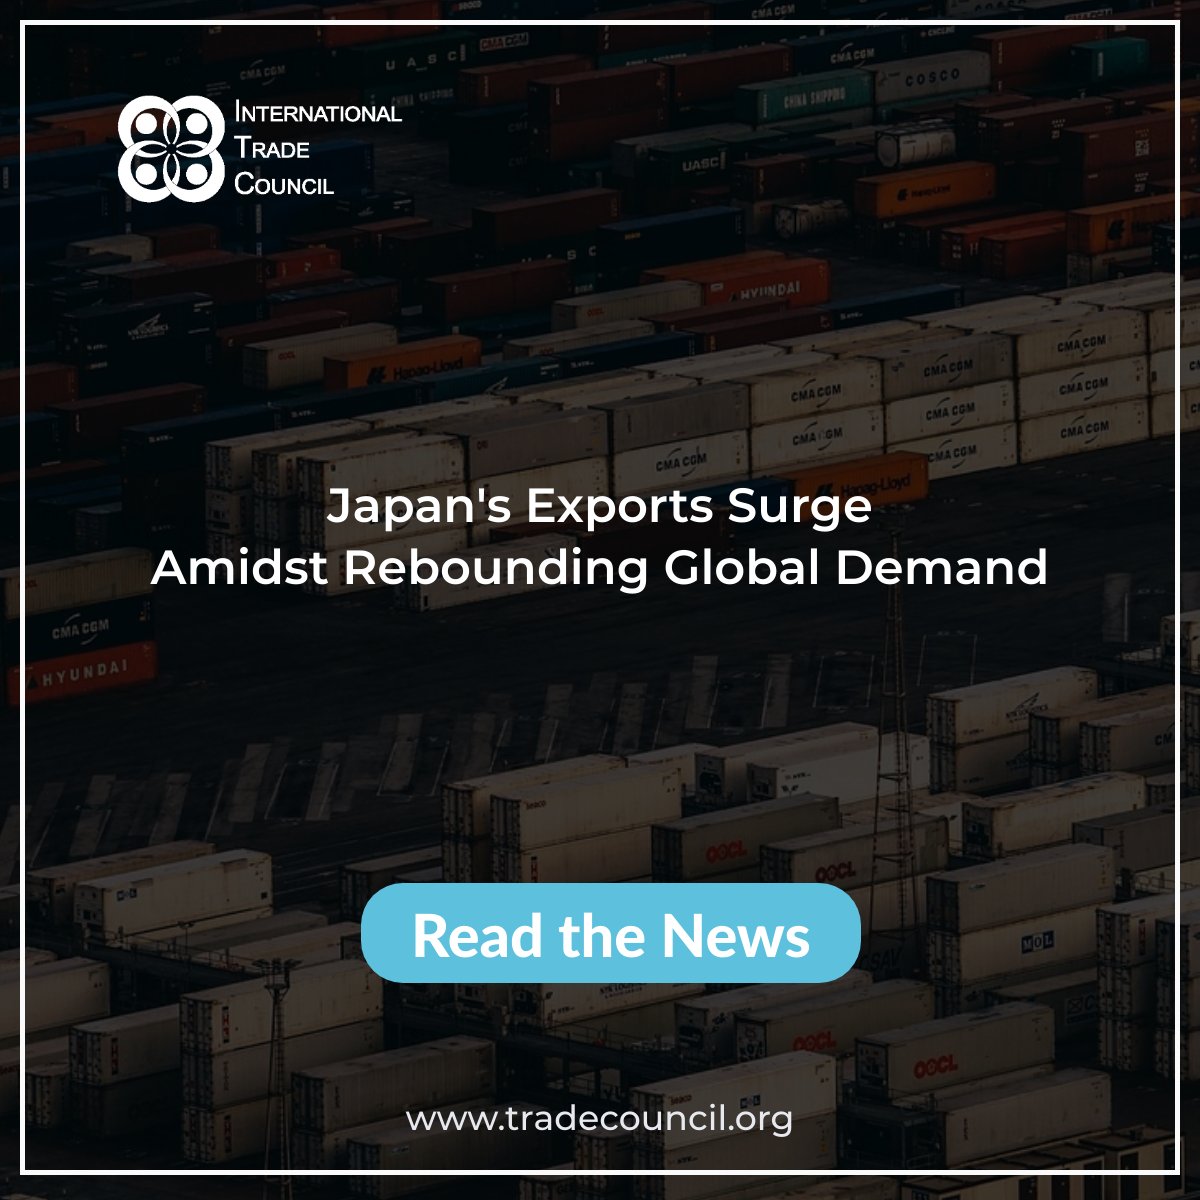 Japan's Exports Surge Amidst Rebounding Global Demand
Read The News: tradecouncil.org/japans-exports…
#BreakingNews #ITCNewsUpdates #JapanExports #GlobalTrade #EconomicRecovery #PolicyOutlook #BusinessConfidence #internationalTradeCouncil